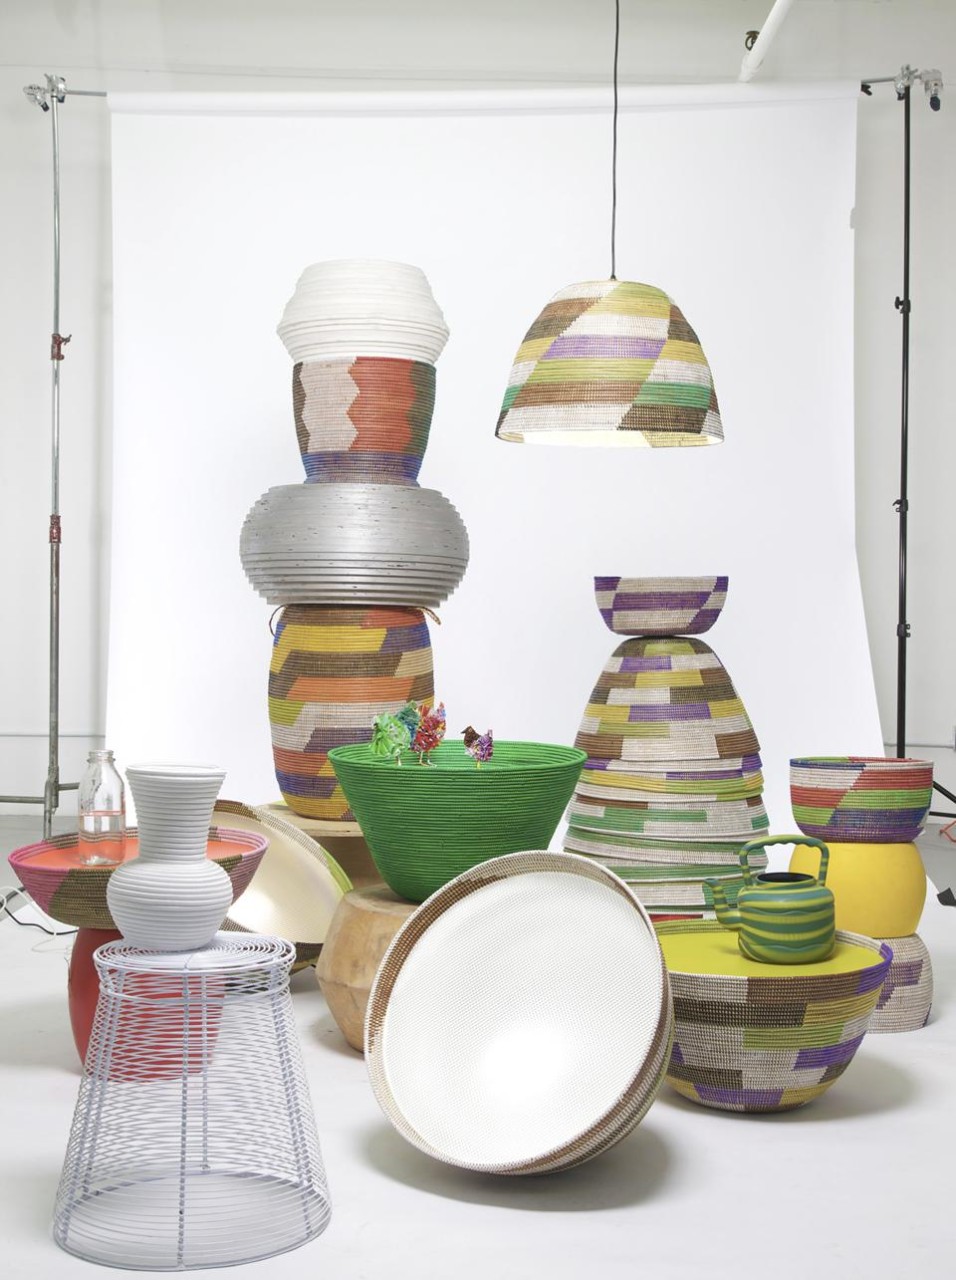 Prototypes & Material Compositions
(Pile Up) including Basket Lamps and
Basket Low Tables, 2010. Photo Daniel Håkansson for Readymade Projects.